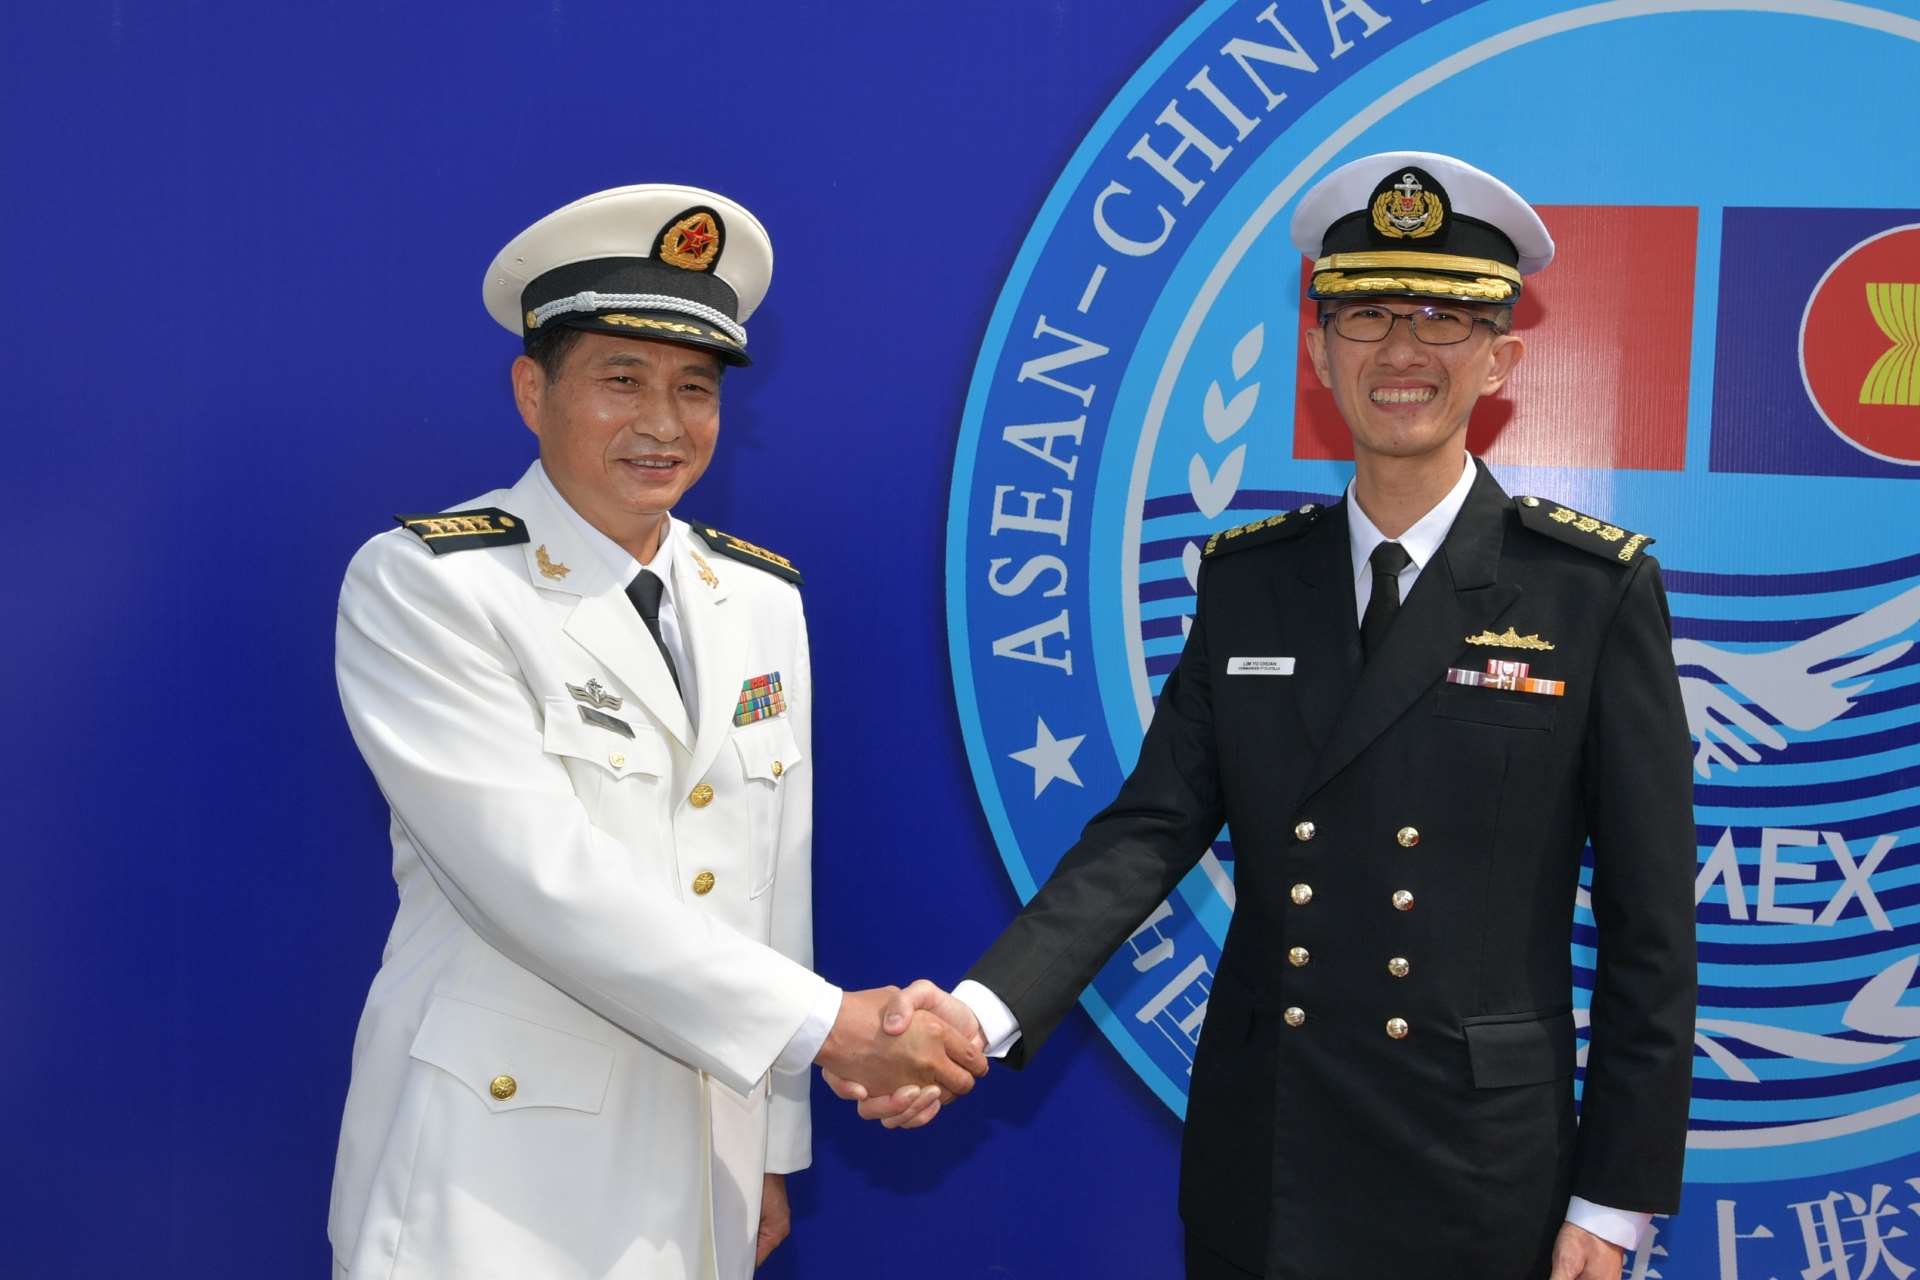 Exercise co-directors, Colonel Lim Yu Chuan (right) from the RSN and Senior Captain Zhu Jianda (left) from the People's Liberation Army Navy (PLAN), congratulating each other on the successful conclusion of the exercise.